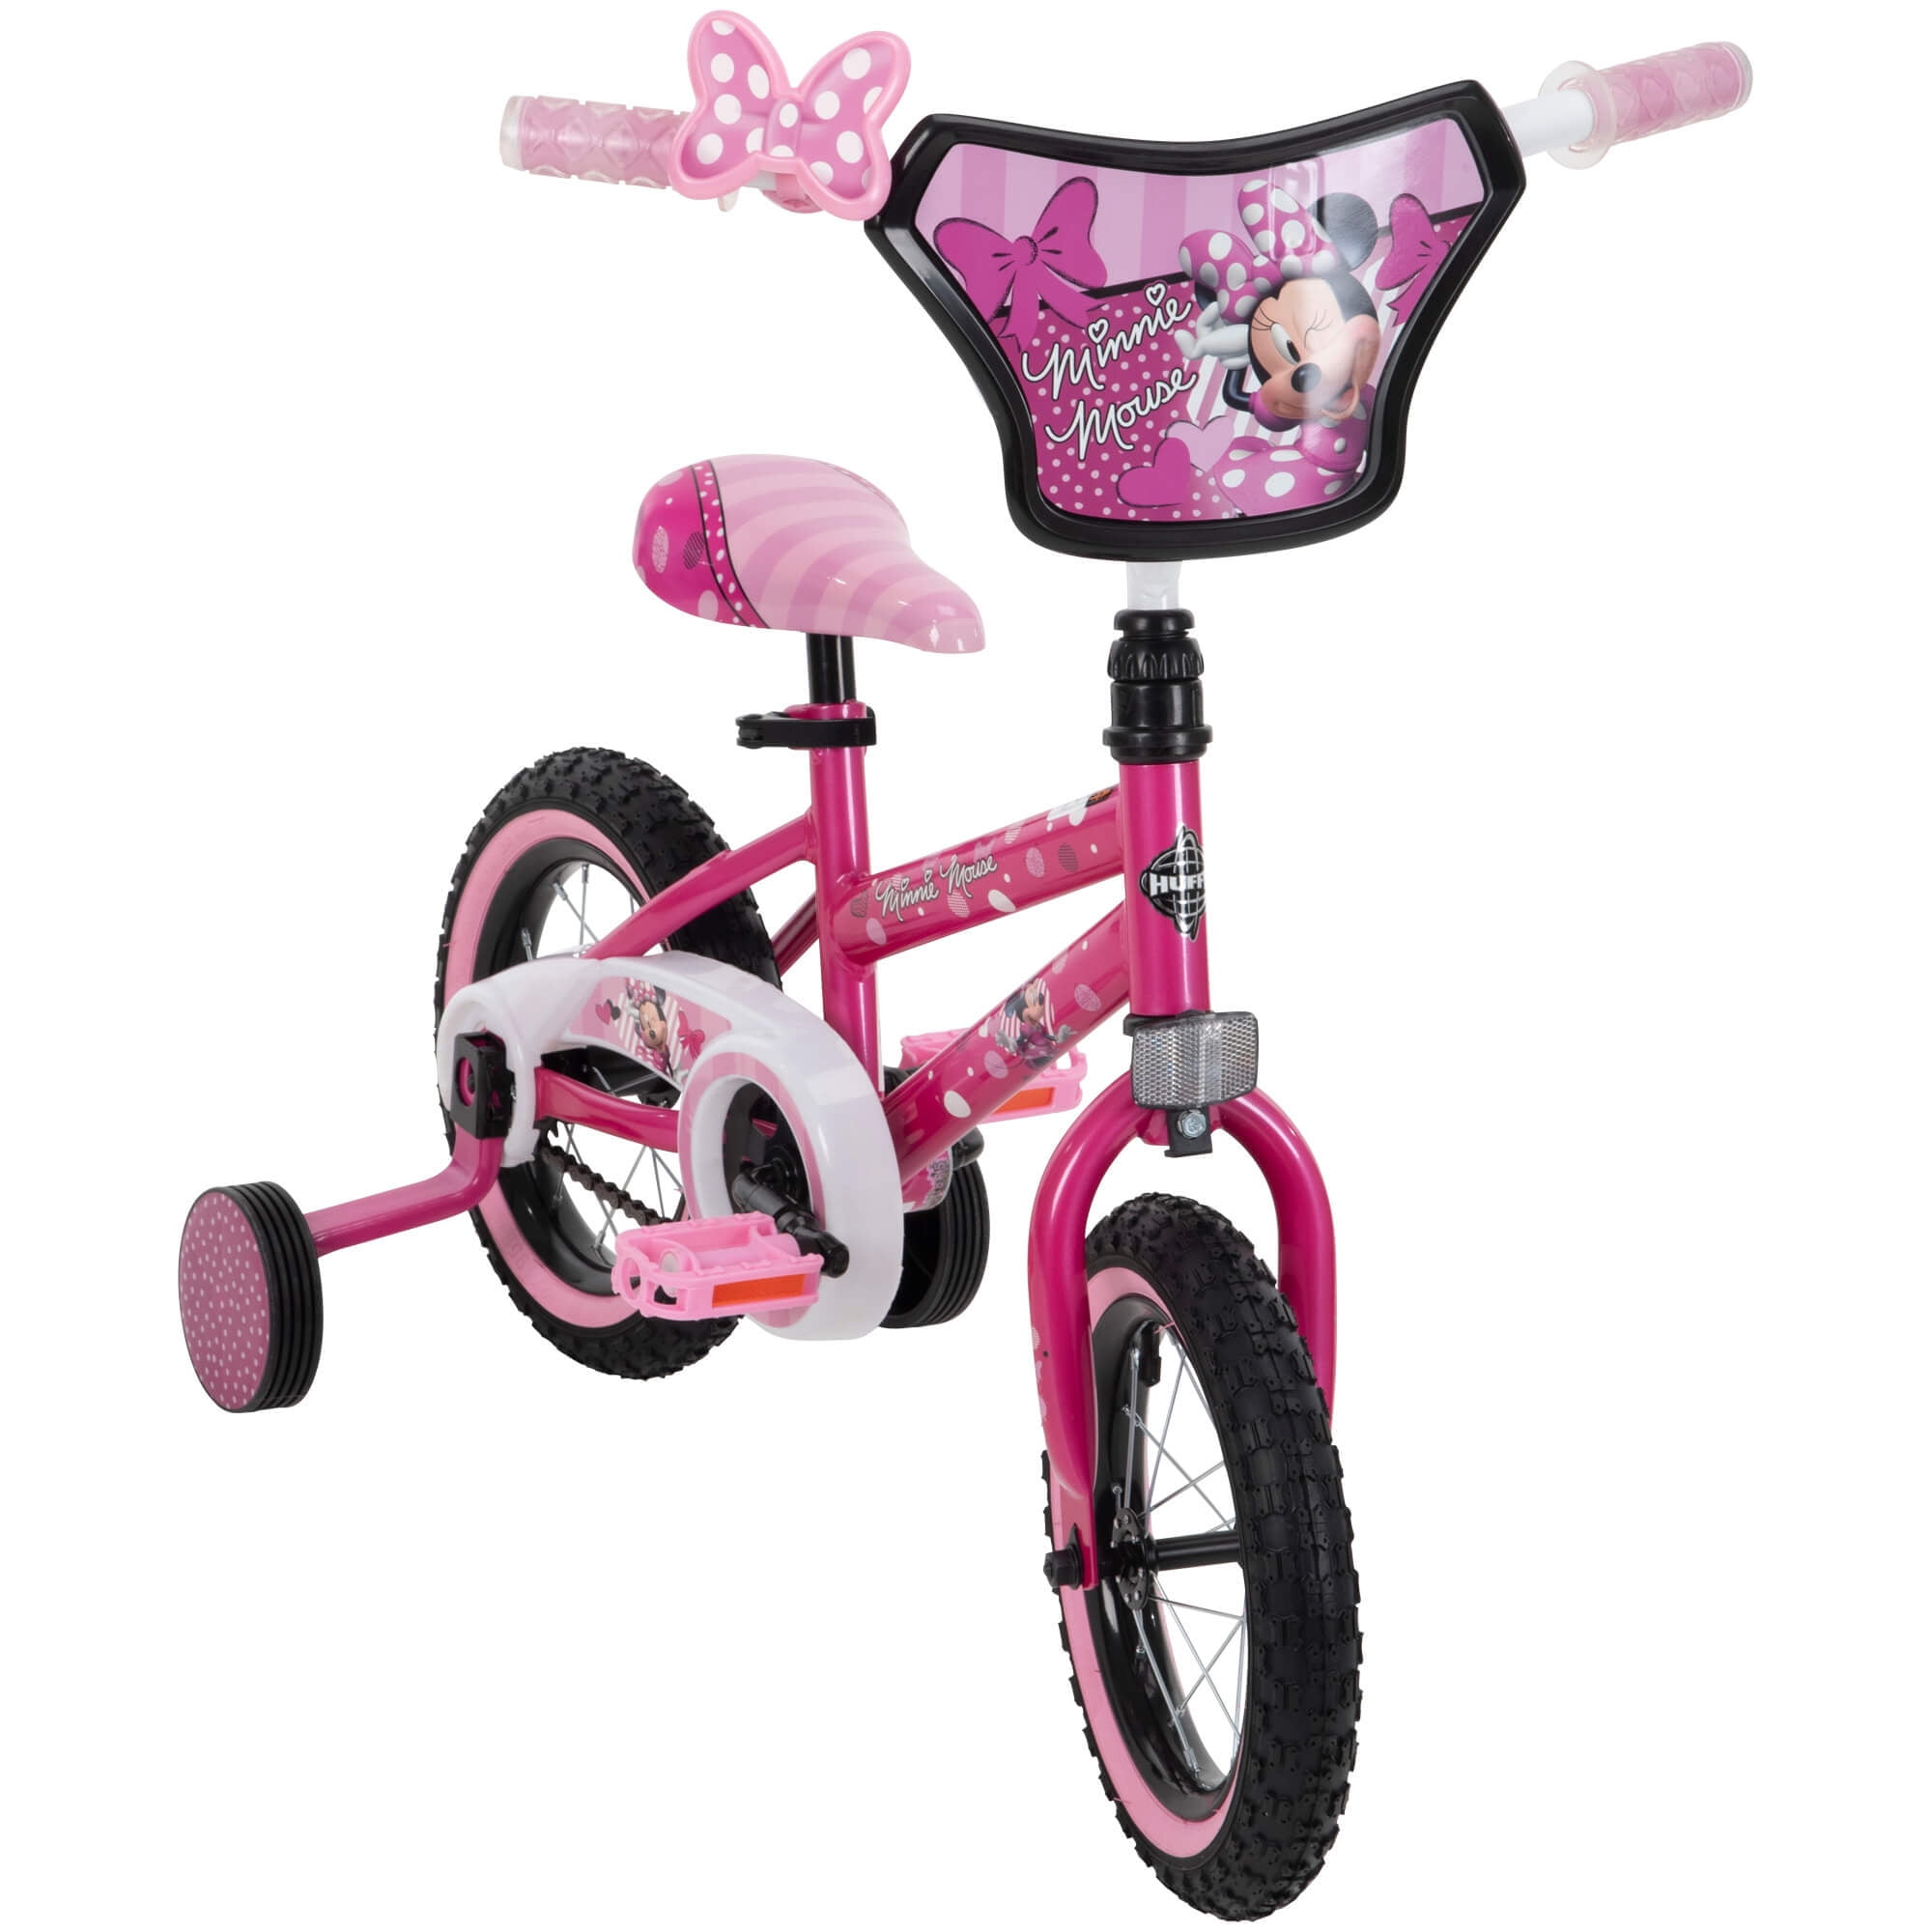 Disney 12 In. Minnie Mouse Bike for Girl's by Huffy - 2